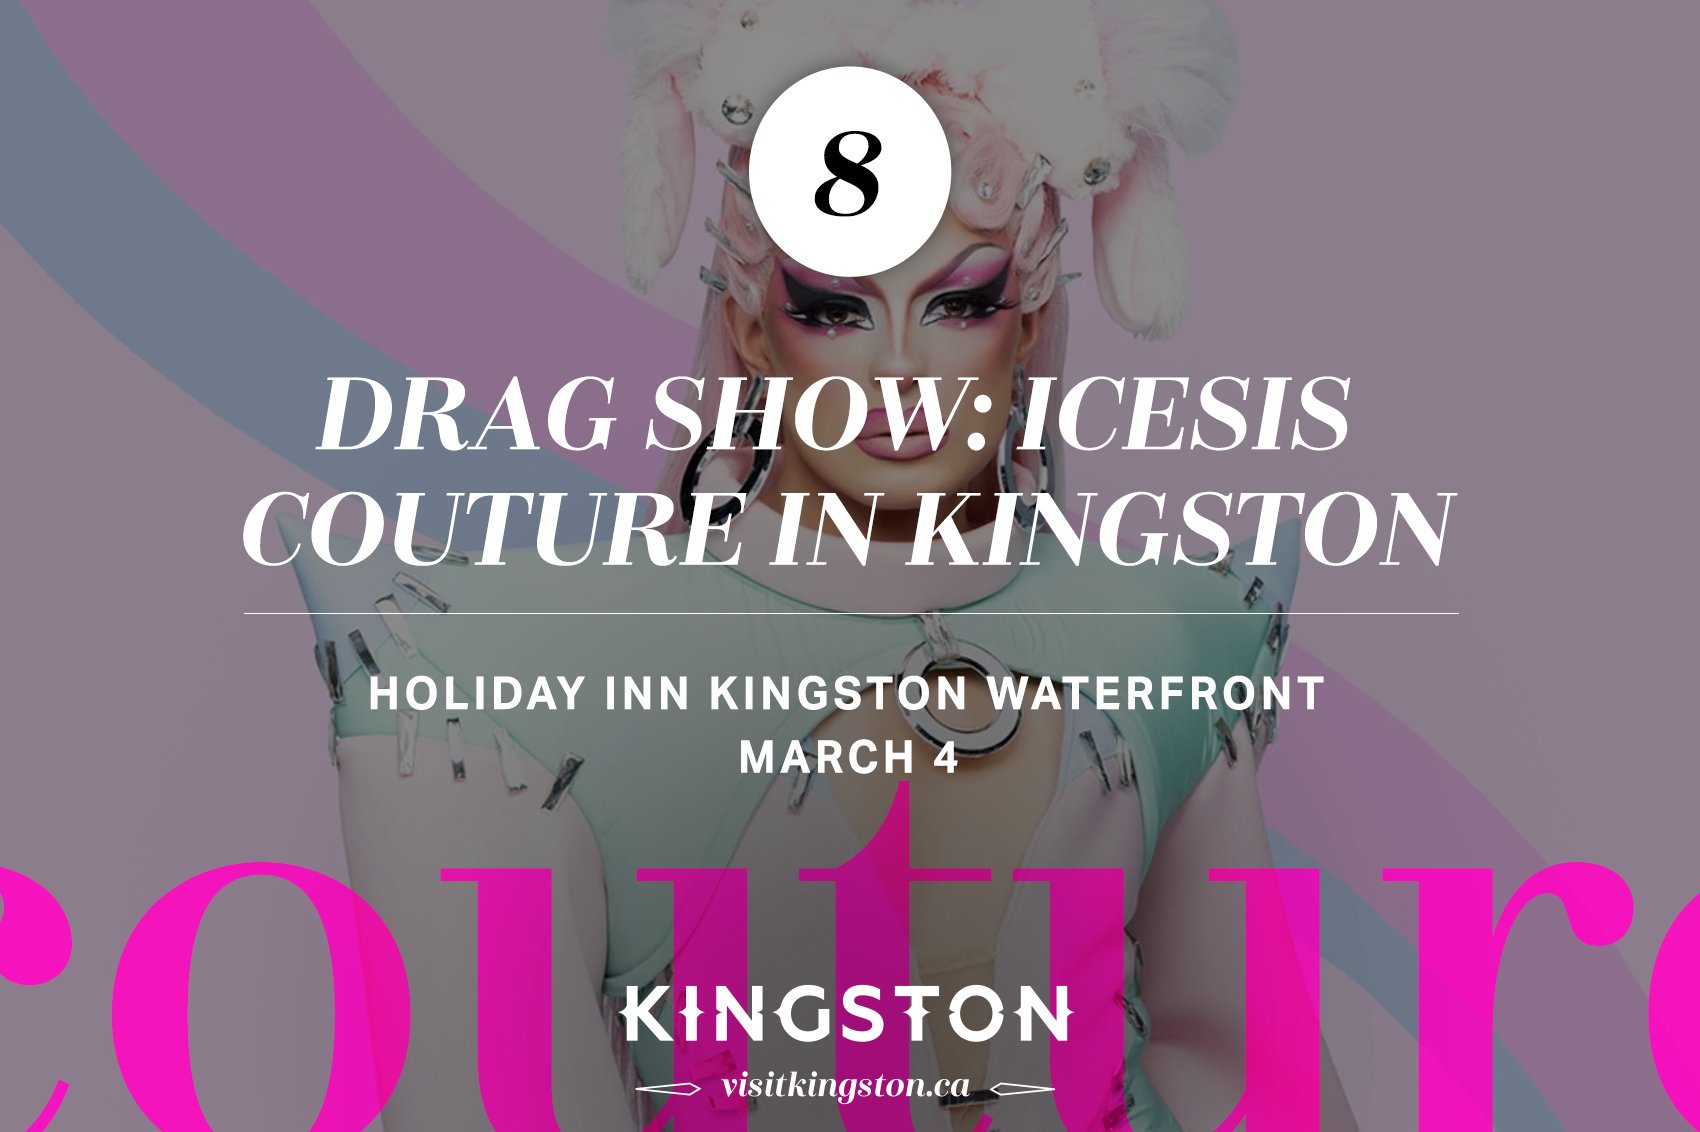 Drag show: Icesis Couture in Kingston